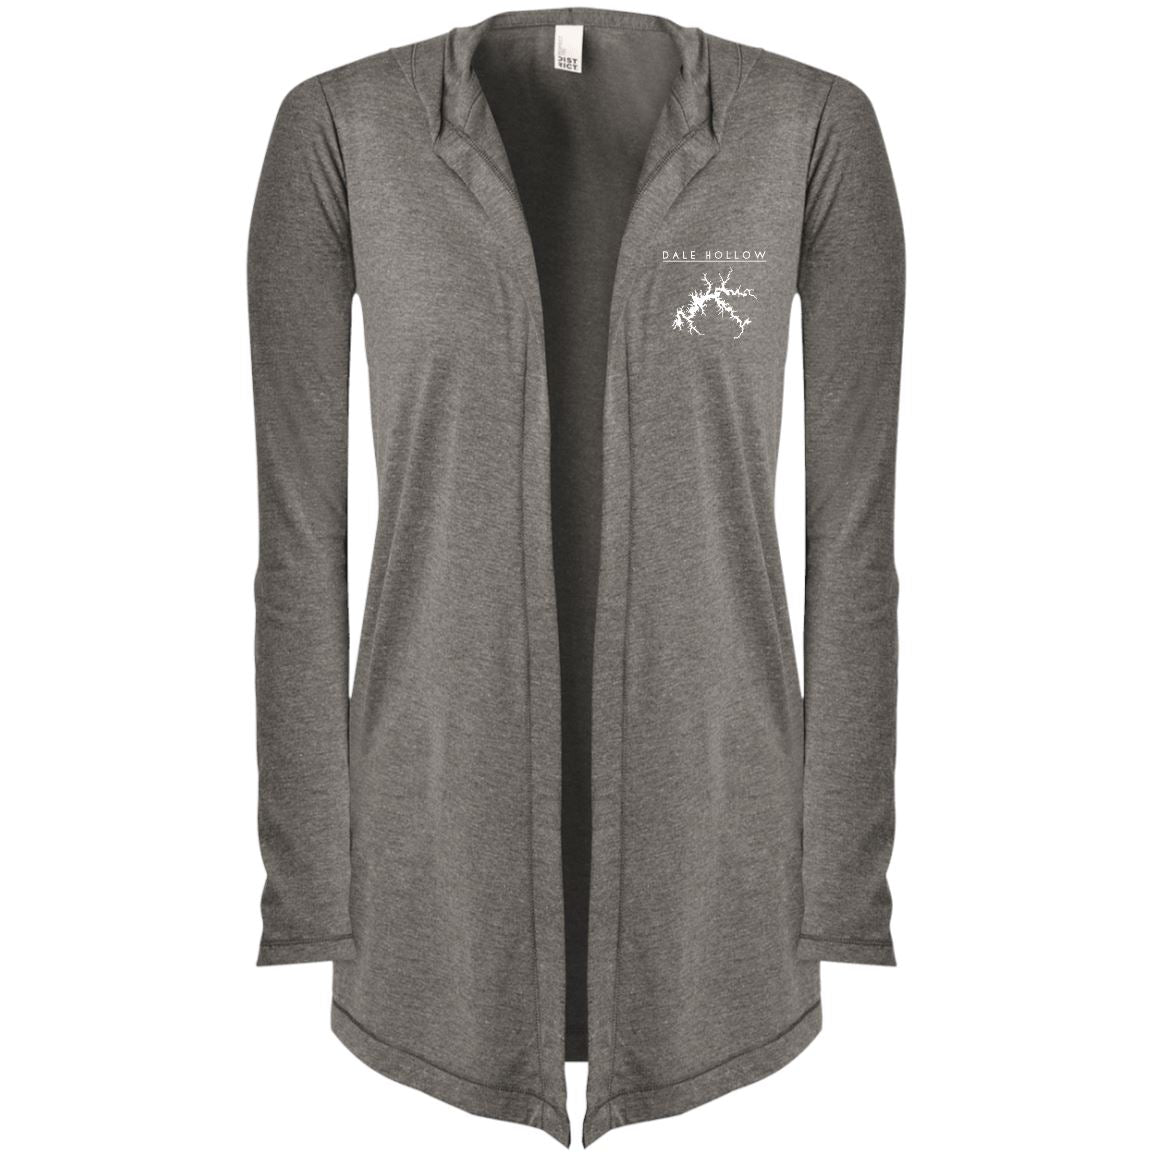 Dale Hollow Embroidered Women's Hooded Cardigan - Houseboat Kings